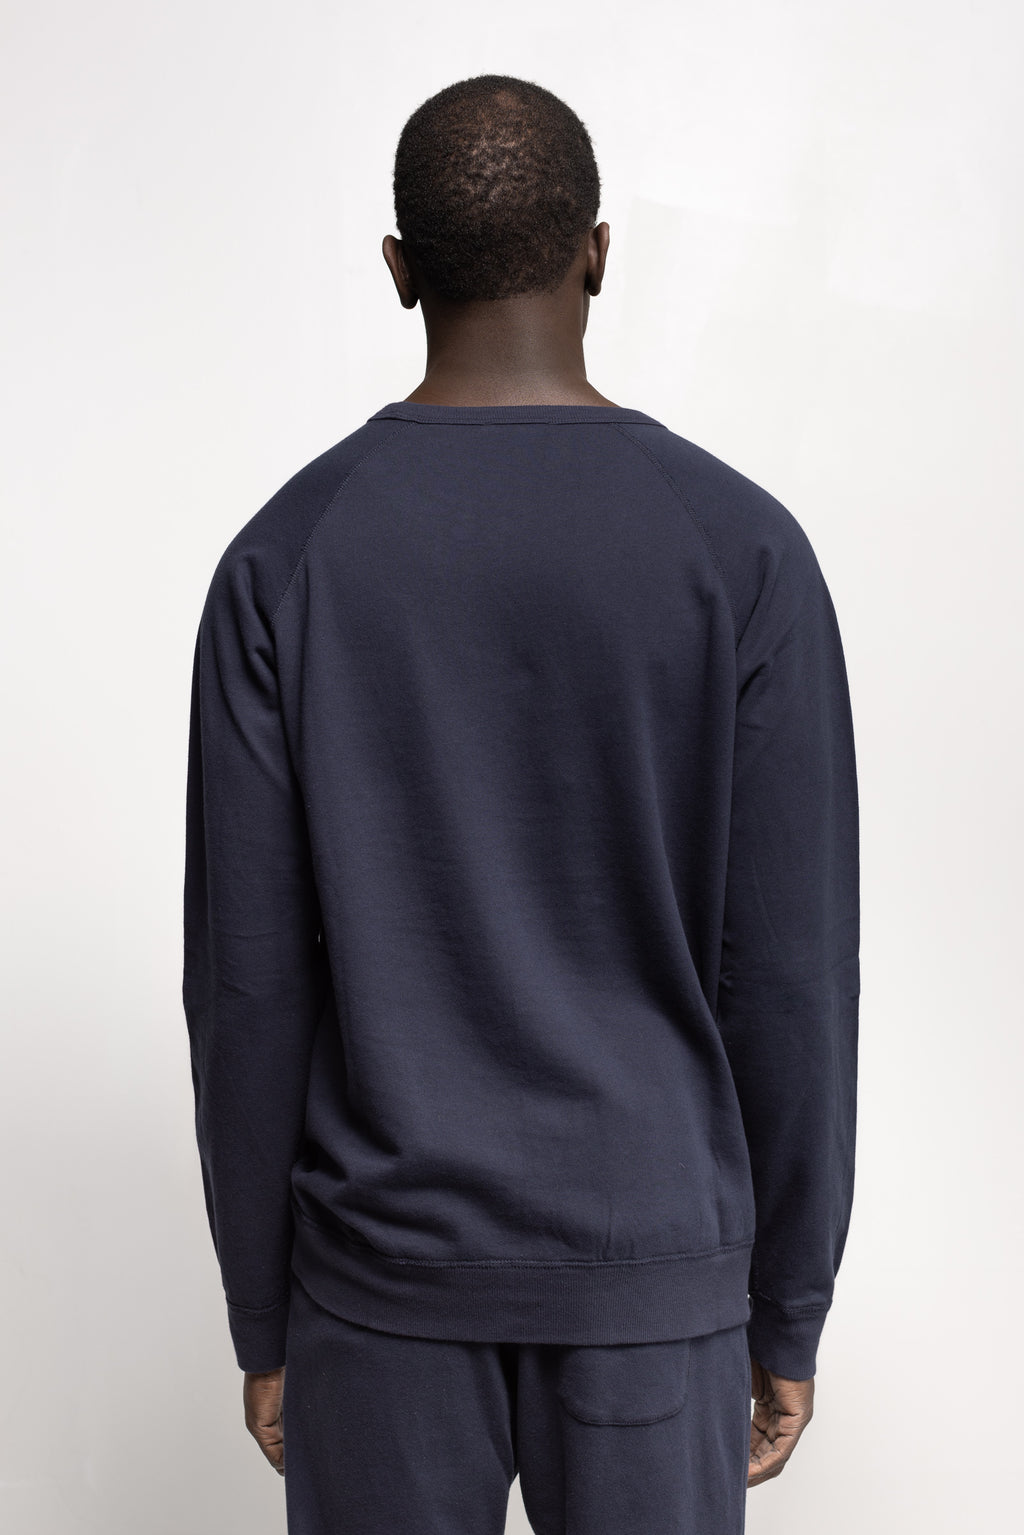 French Terry Long Sleeve Crew in Navy 04